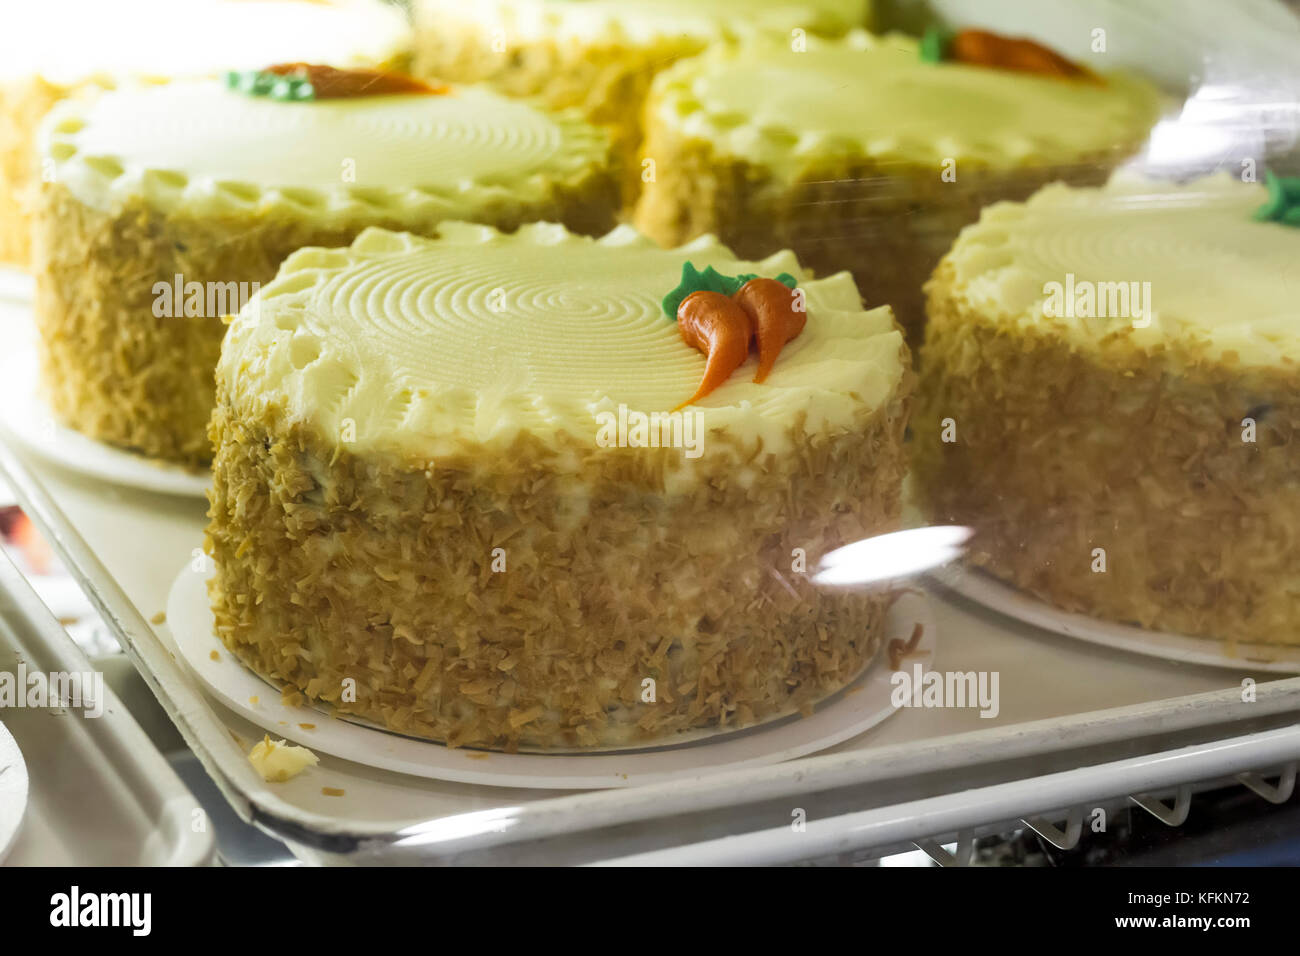 Carrot Cake Cupcake With Cream Cheese Frosting at a bakery. Stock Photo